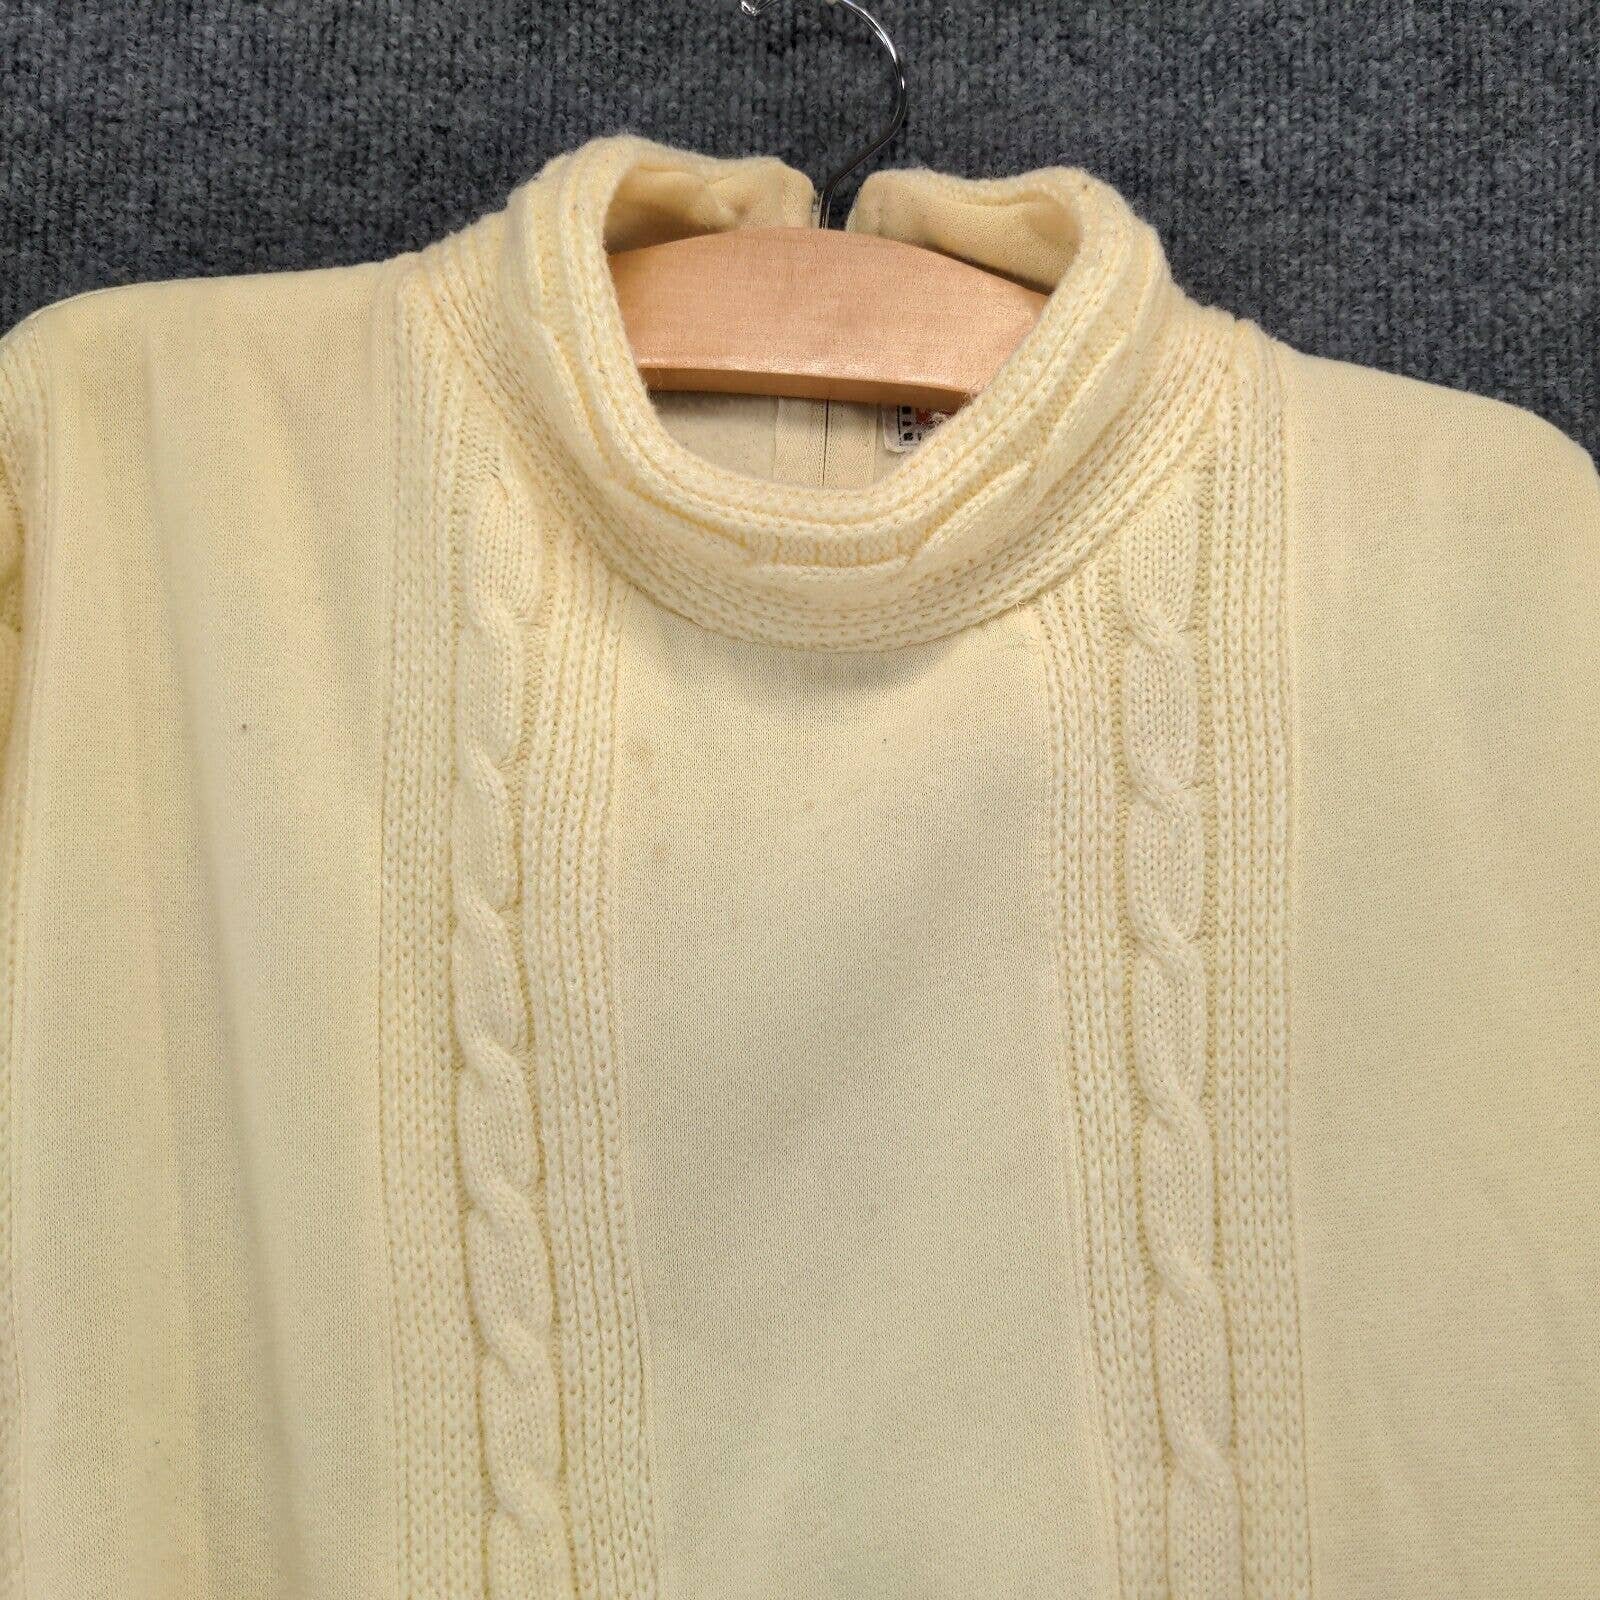 reasonable price Licorice Womens Cable Knit Pullover Sweater Cream Medium Long Sleeve Turtle Neck PmGMD82d1 just buy it